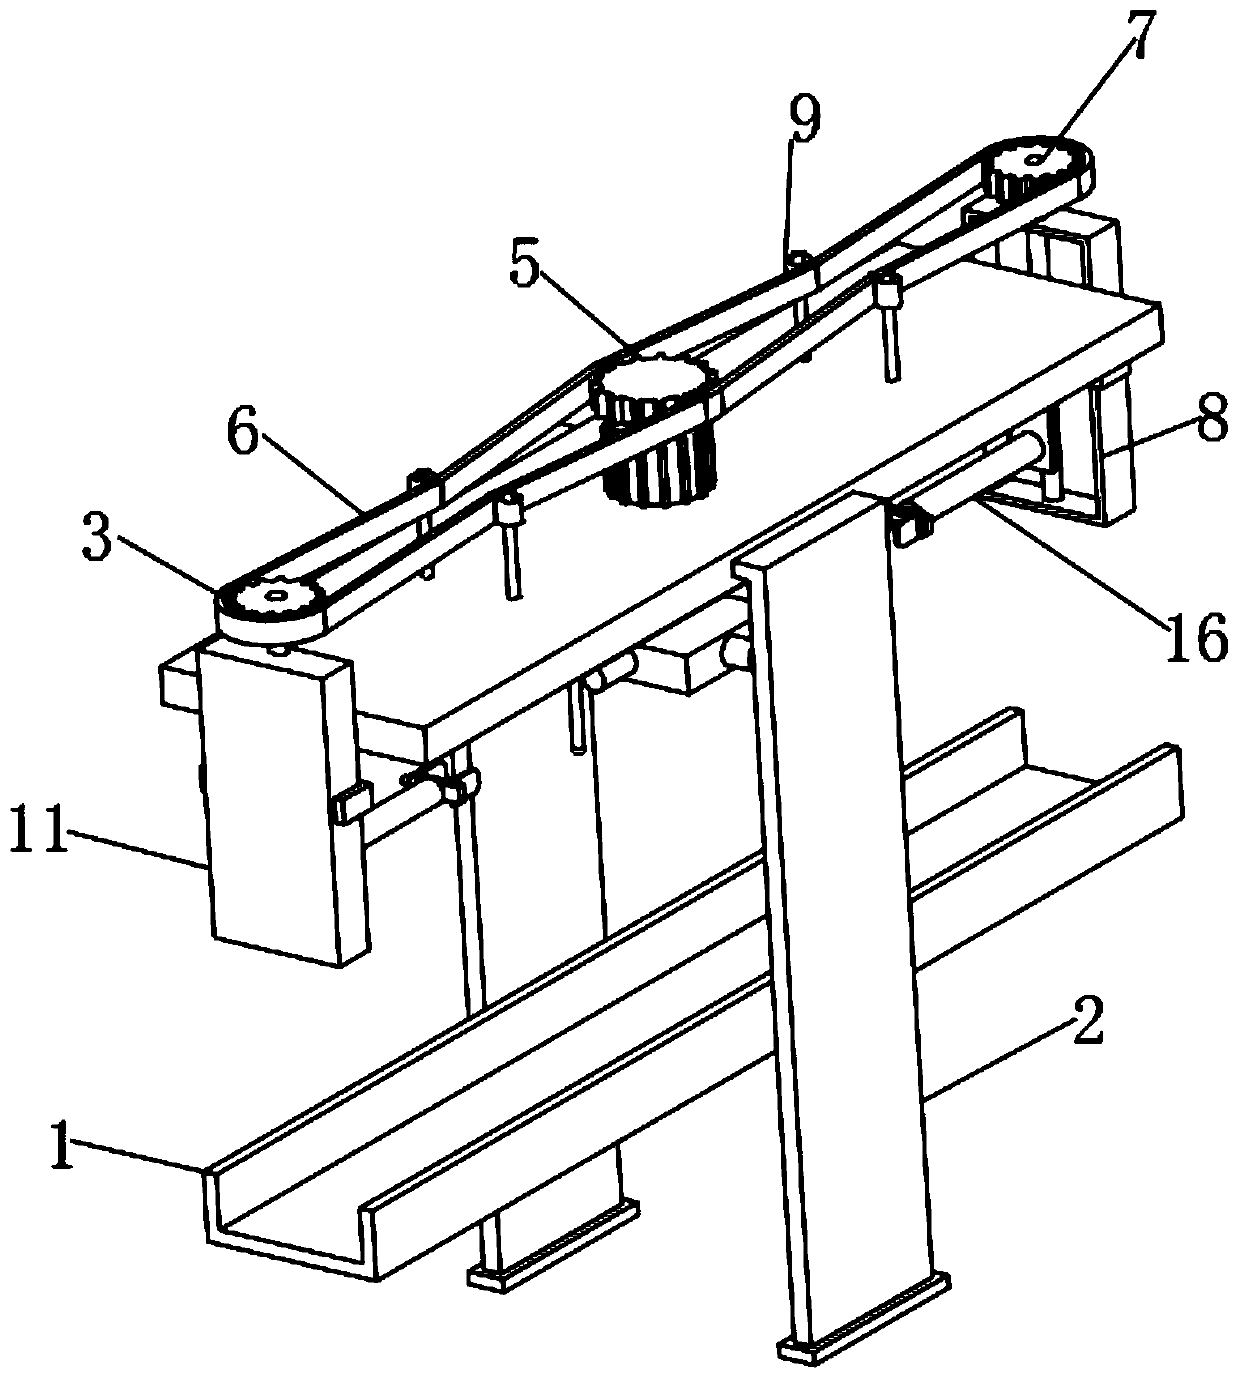 Automatic packaging device for fertilizer production and processing